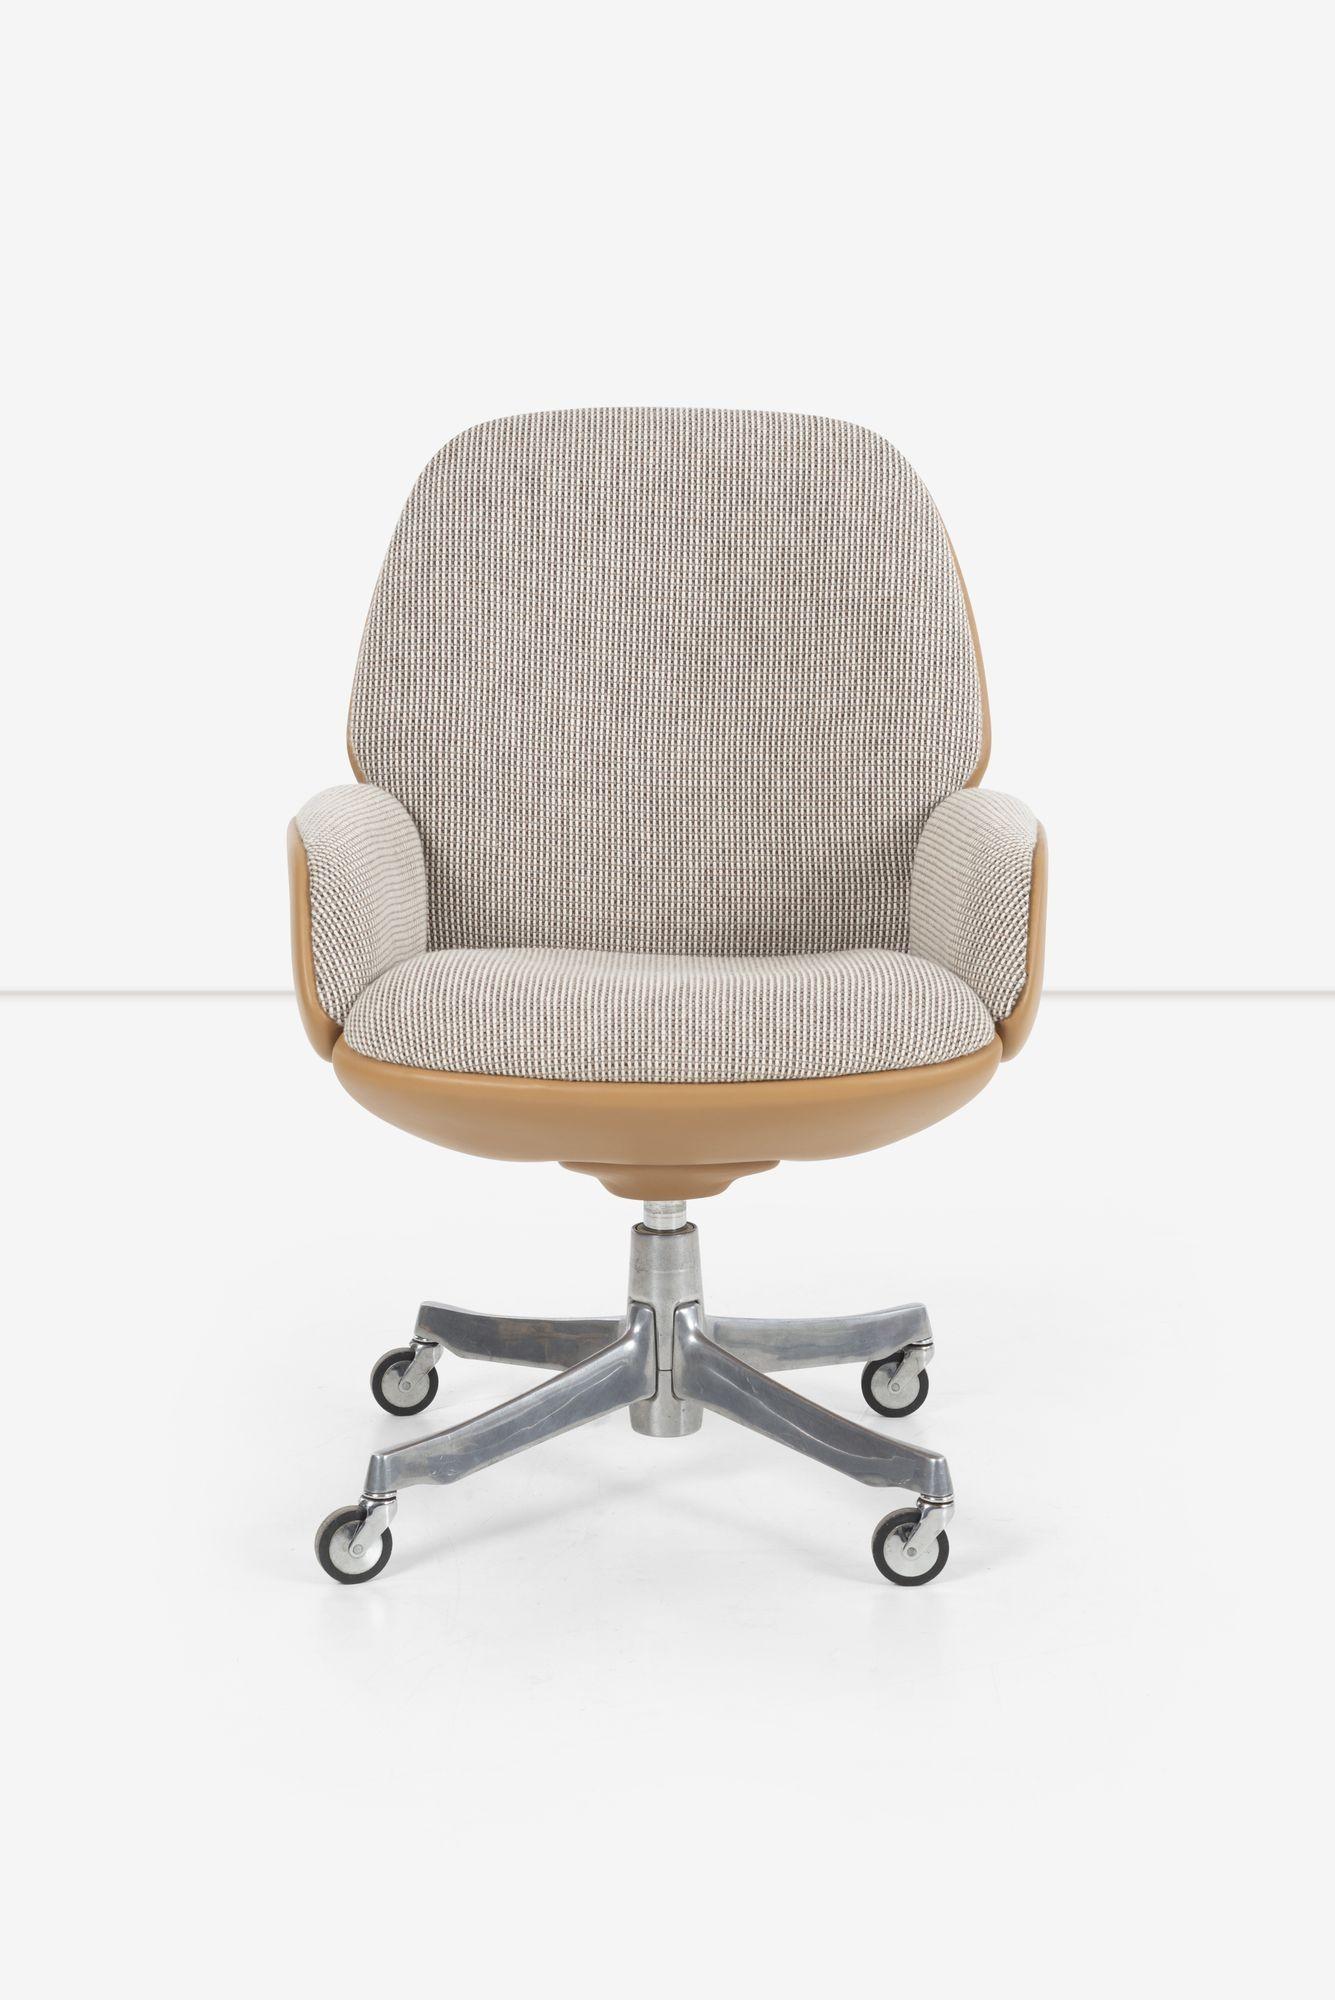 Warren platner executive desk chair 
Steelcase, USA, 1972. Aluminum, Reupholstered with Knoll Cato Fabric and Spinneybeck leather.
 
Measures: Seat height: 21.5